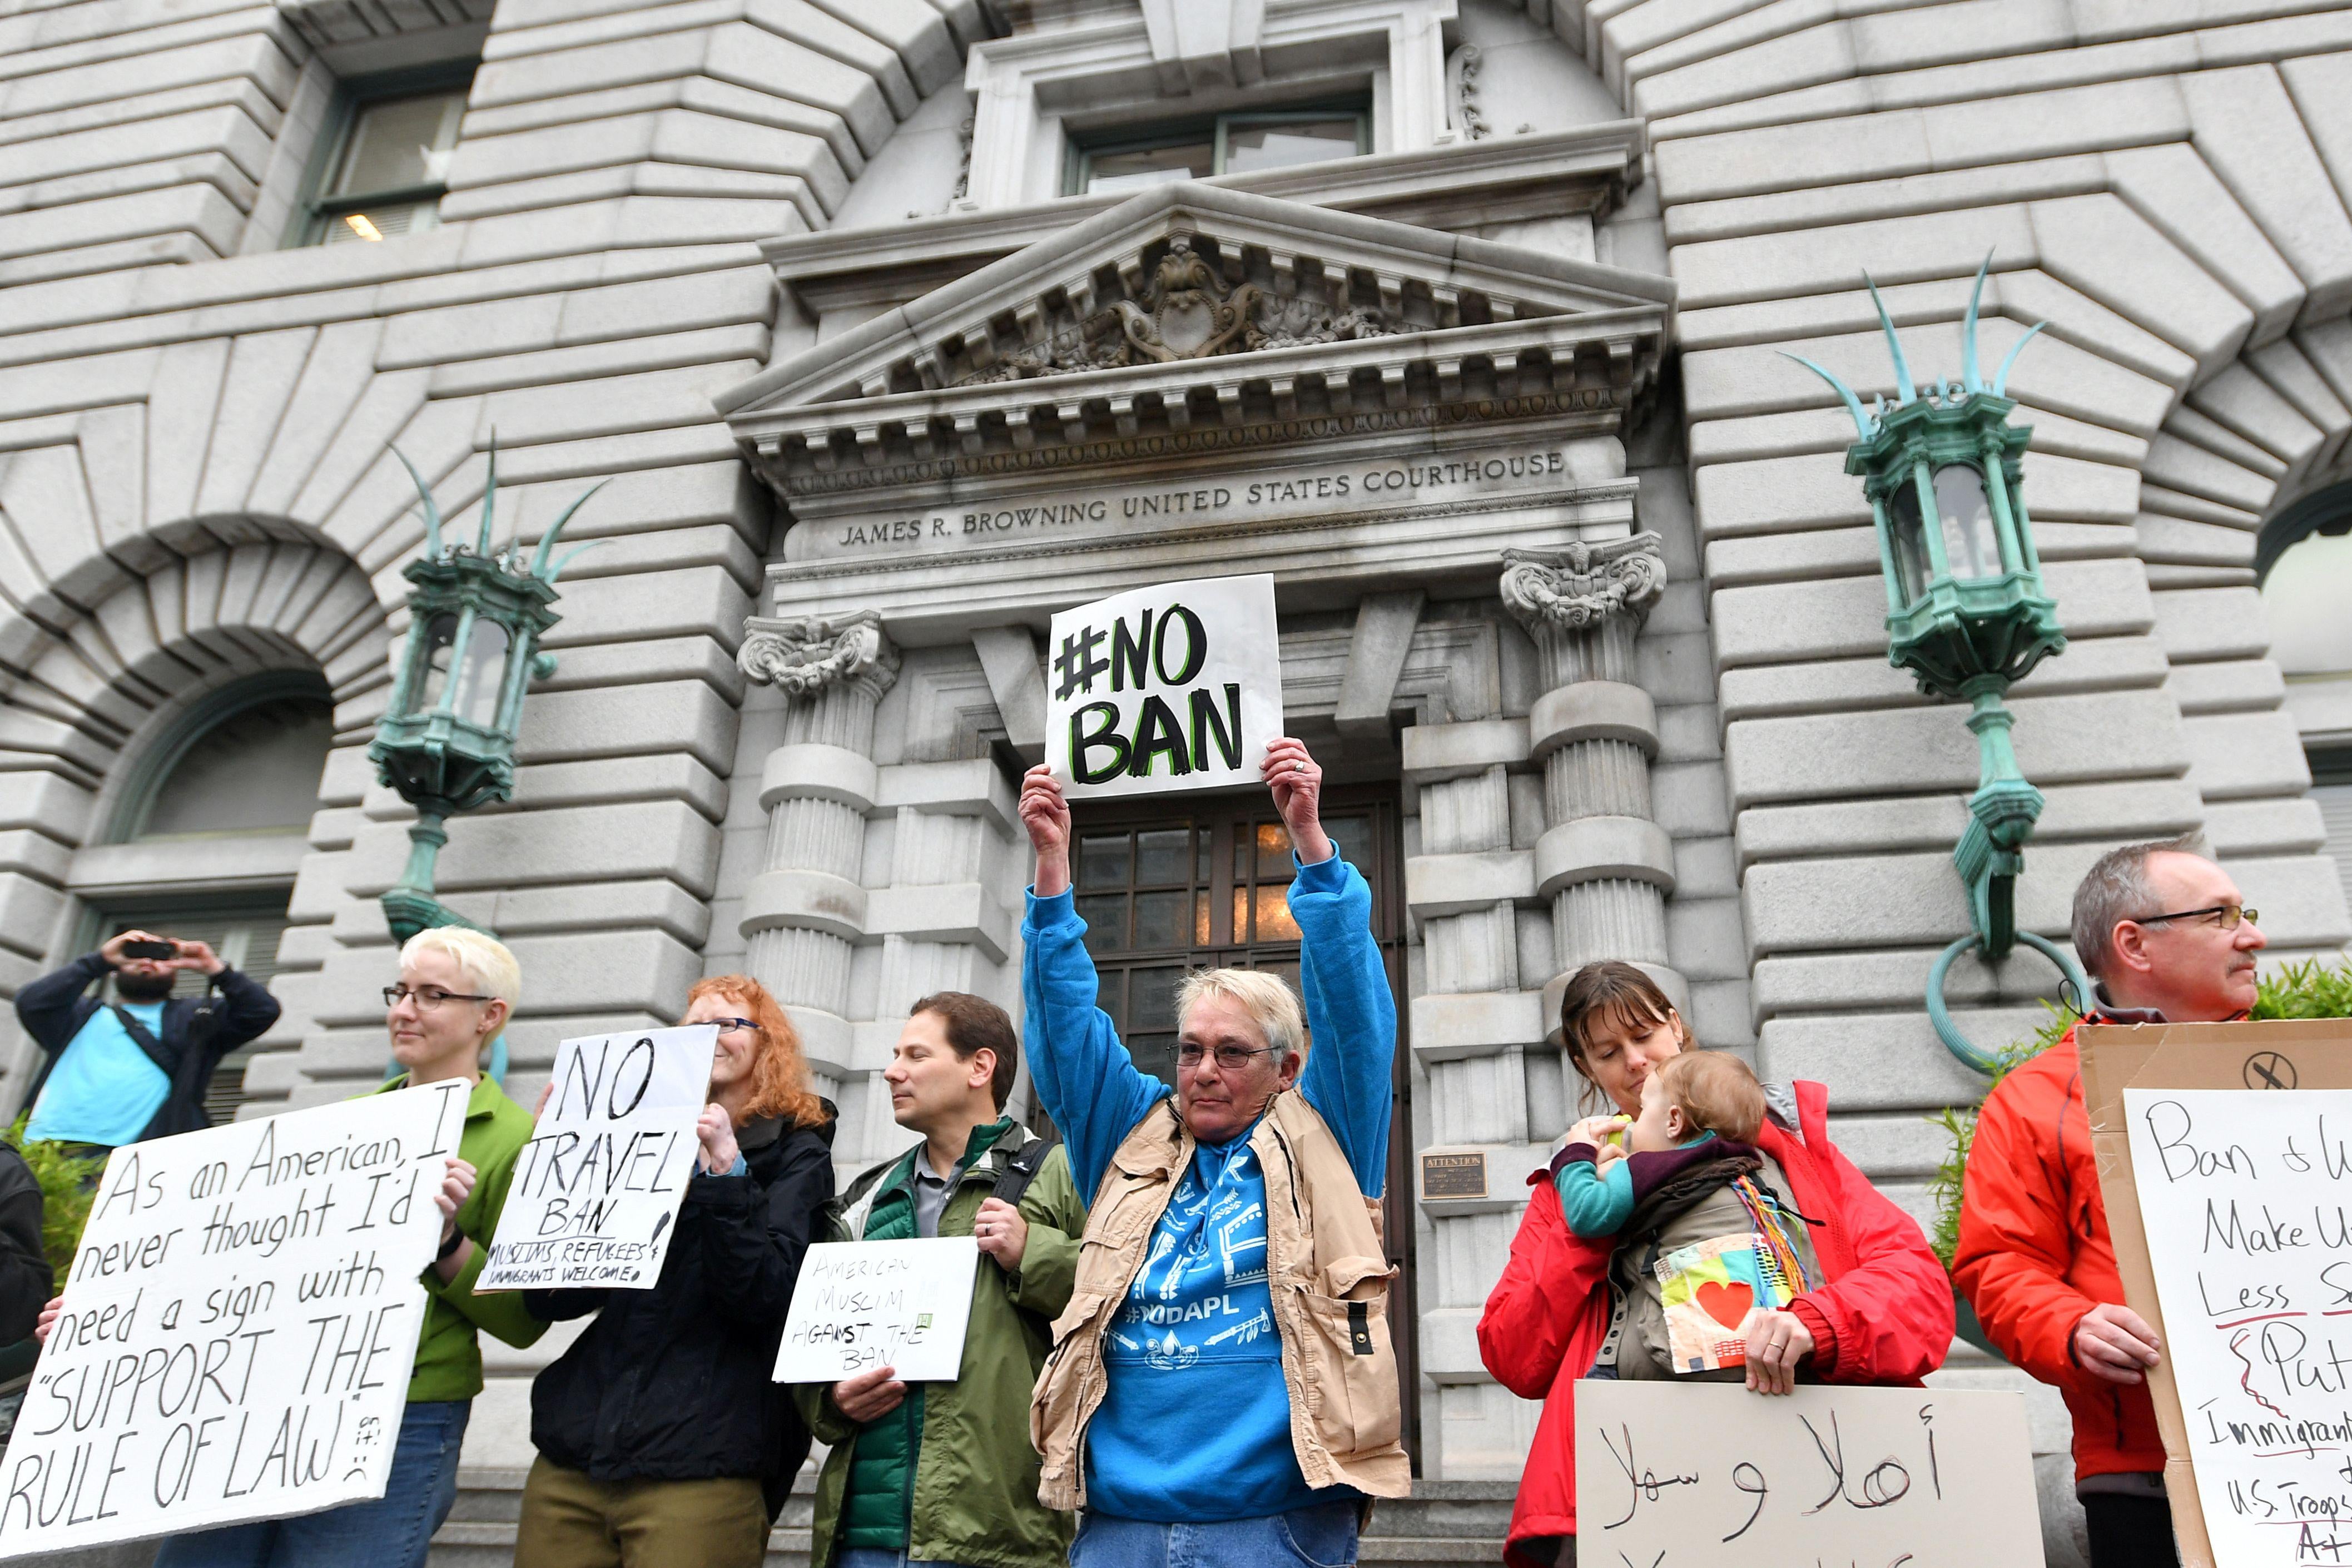 Protesters stand in front of the United States Court of Appeals for the Ninth Circuit in San Francisco, California on February 7, 2017. 
A federal appeals court heard arguments on Tuesday on whether to lift a nationwide suspension of President Donald Trump's travel ban targeting citizens of seven Muslim-majority countries. / AFP / Josh Edelson        (Photo credit should read JOSH EDELSON/AFP/Getty Images)